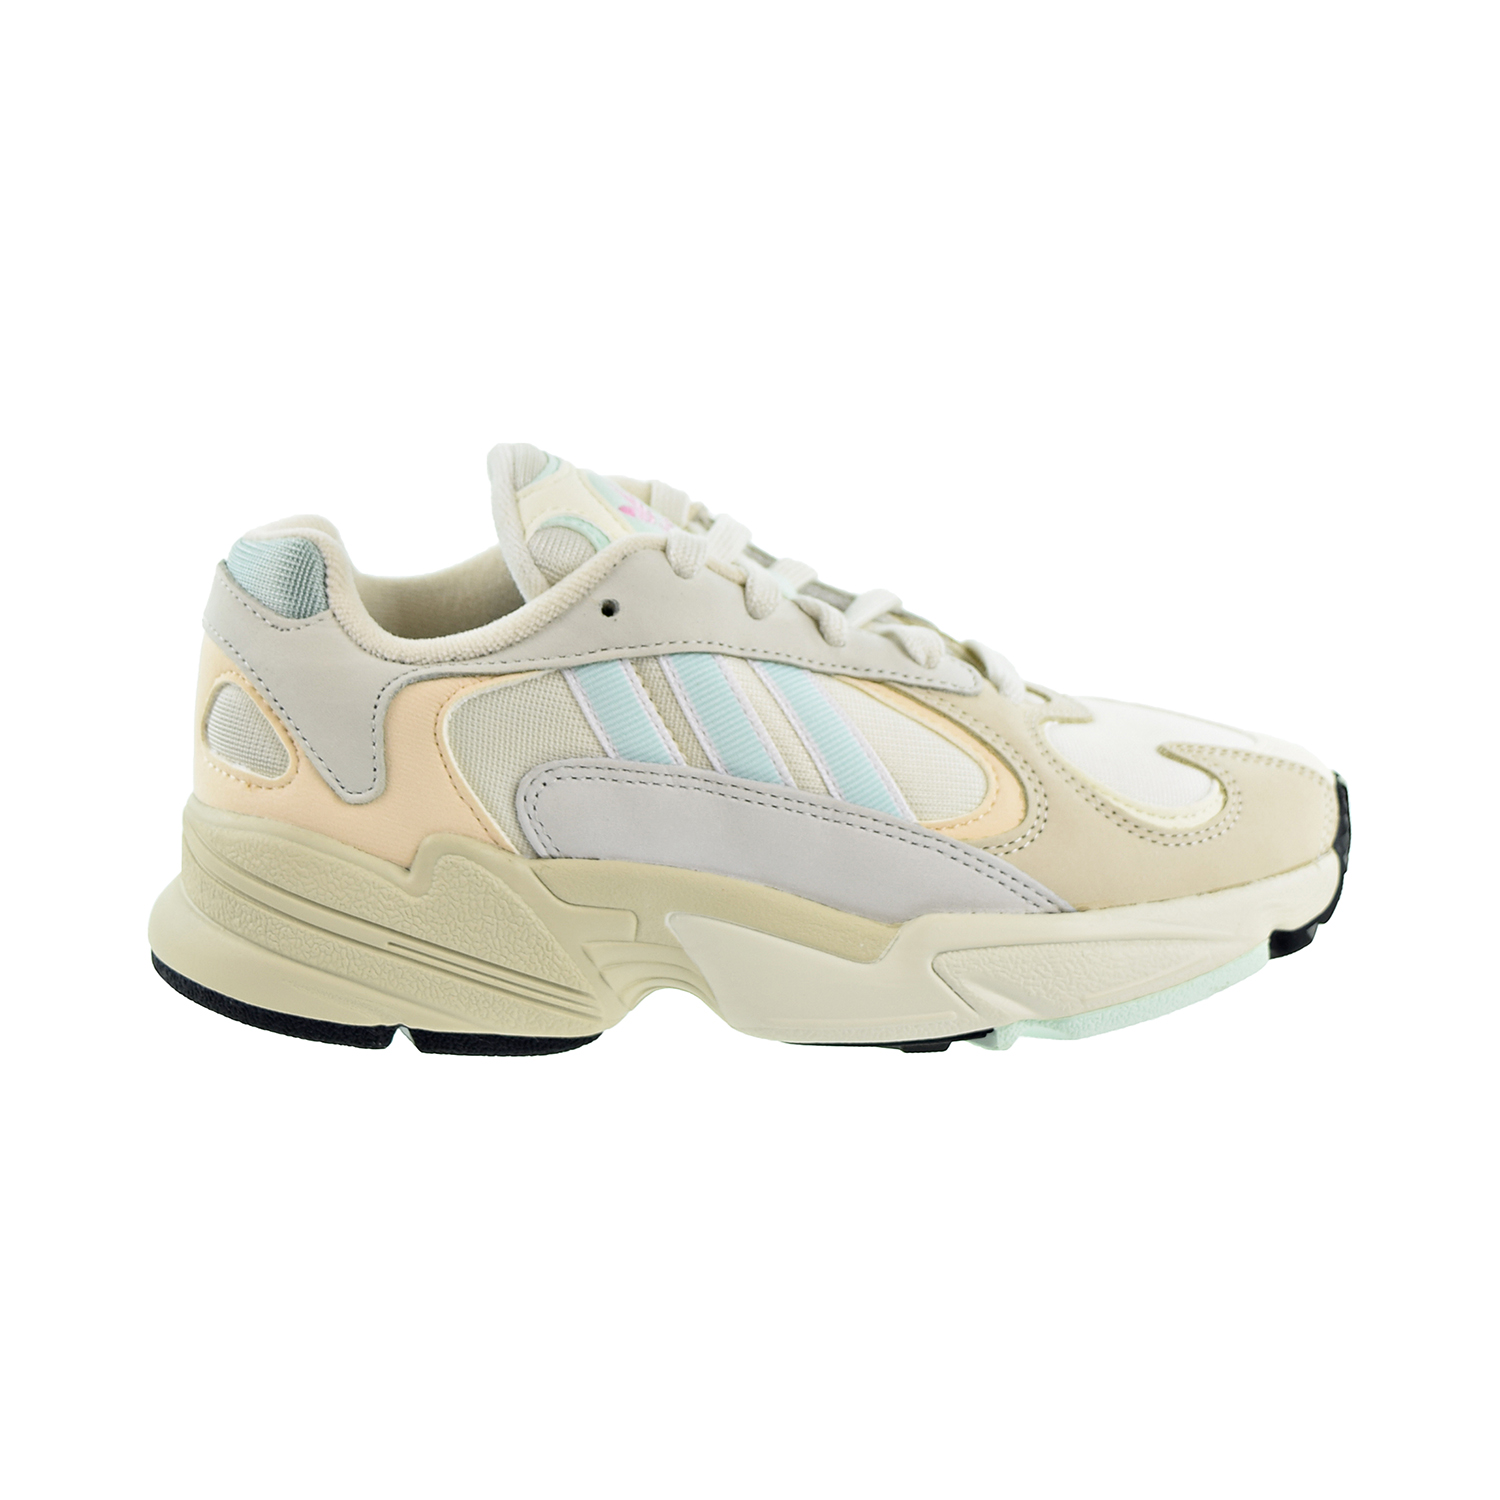 Adidas Yung-1 Men's Shoes Off White-Ice 